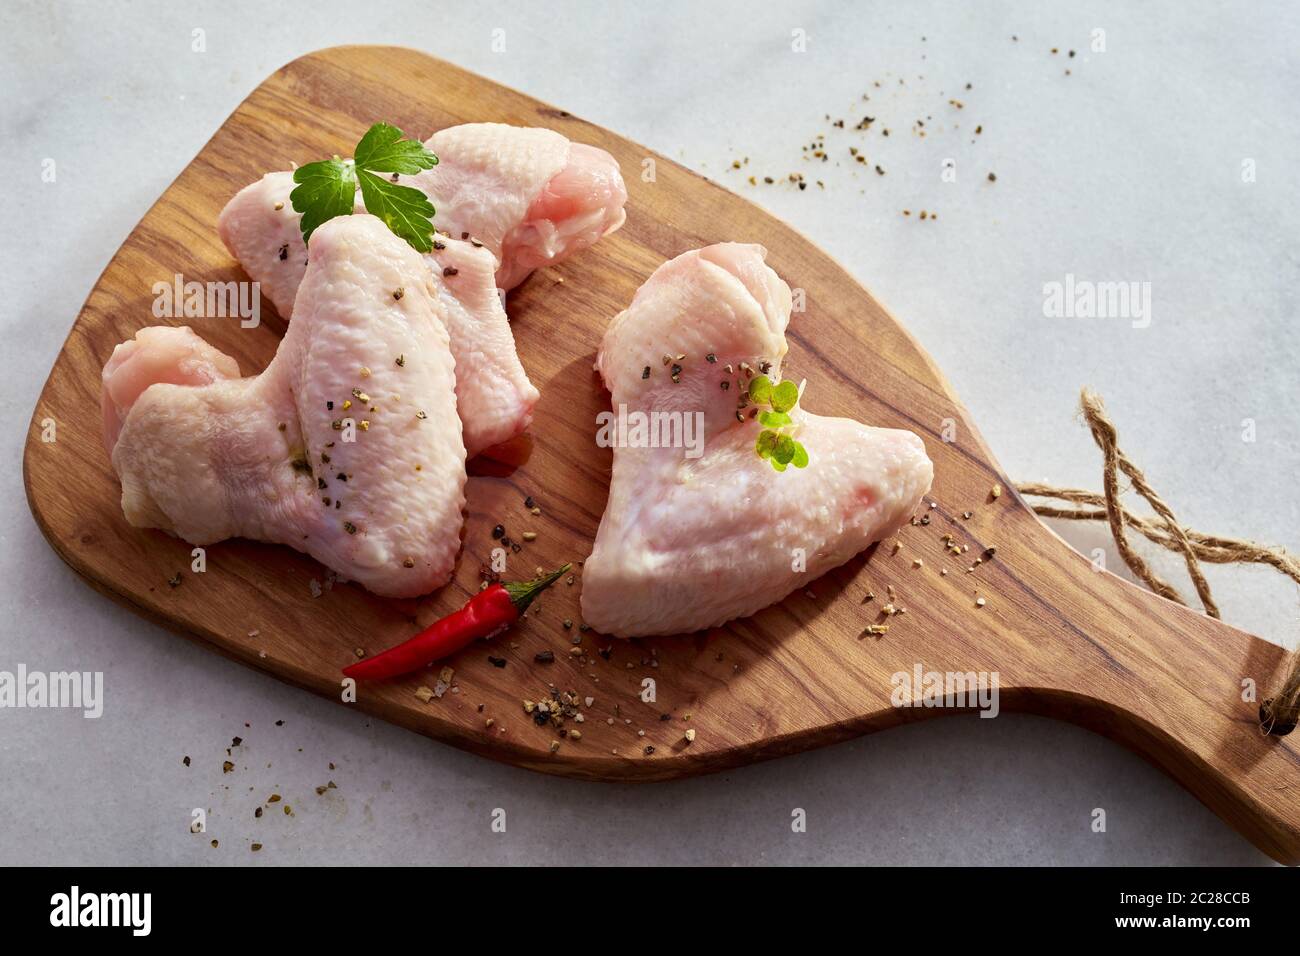 Portions of raw chicken with herbs and spices and red hot chili peppers on a wooden cutting board over a white marble counter in an overhead view Stock Photo